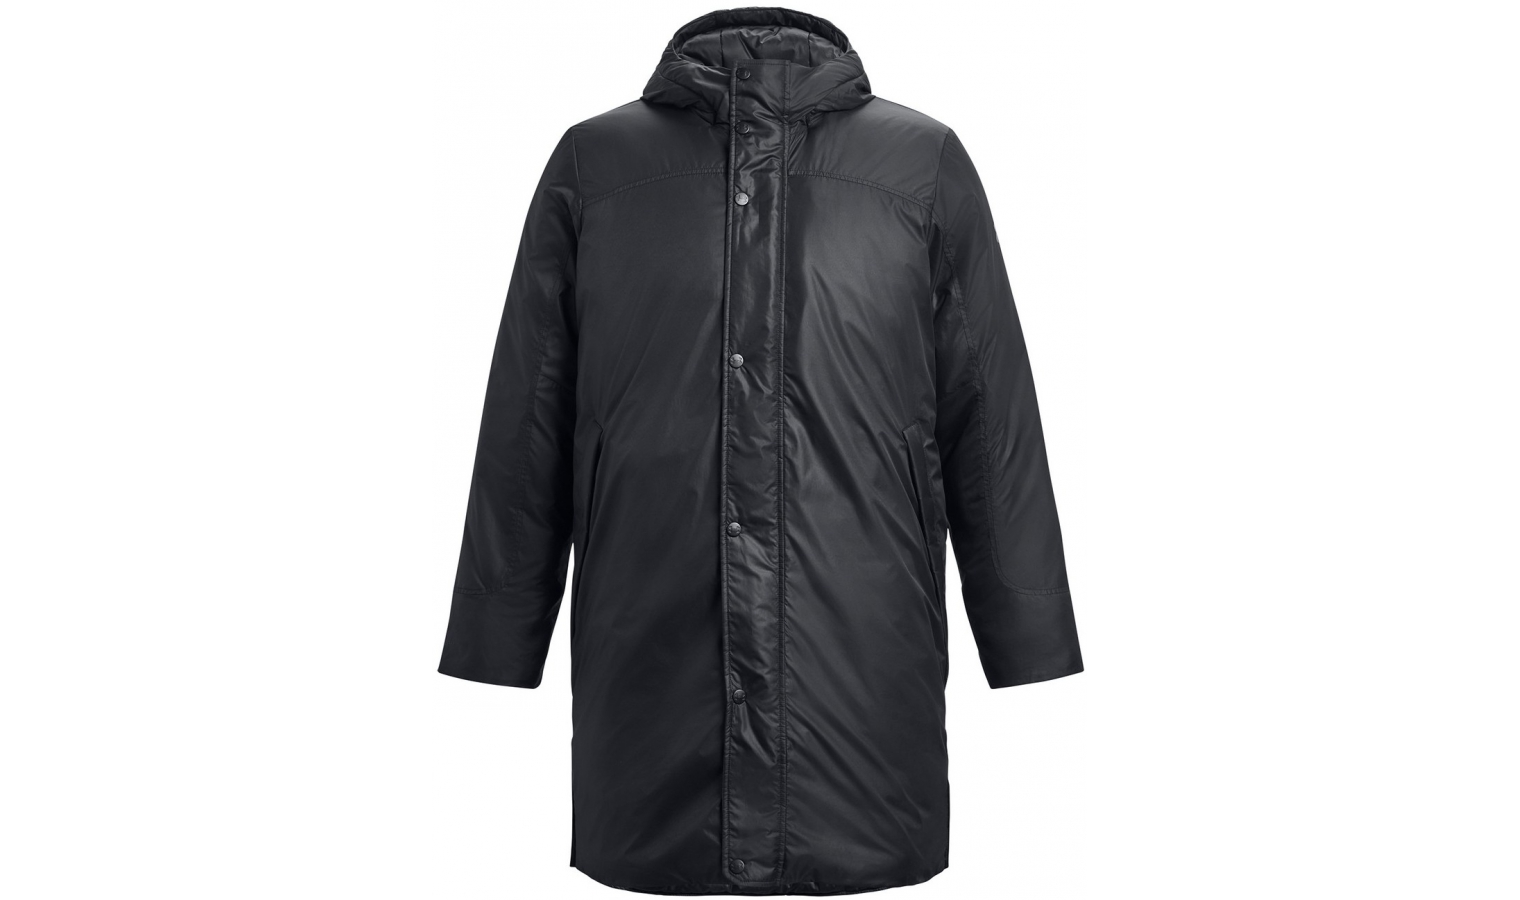 COAT STRM jacket BENCH | INS black Under Armour AD Mens winter